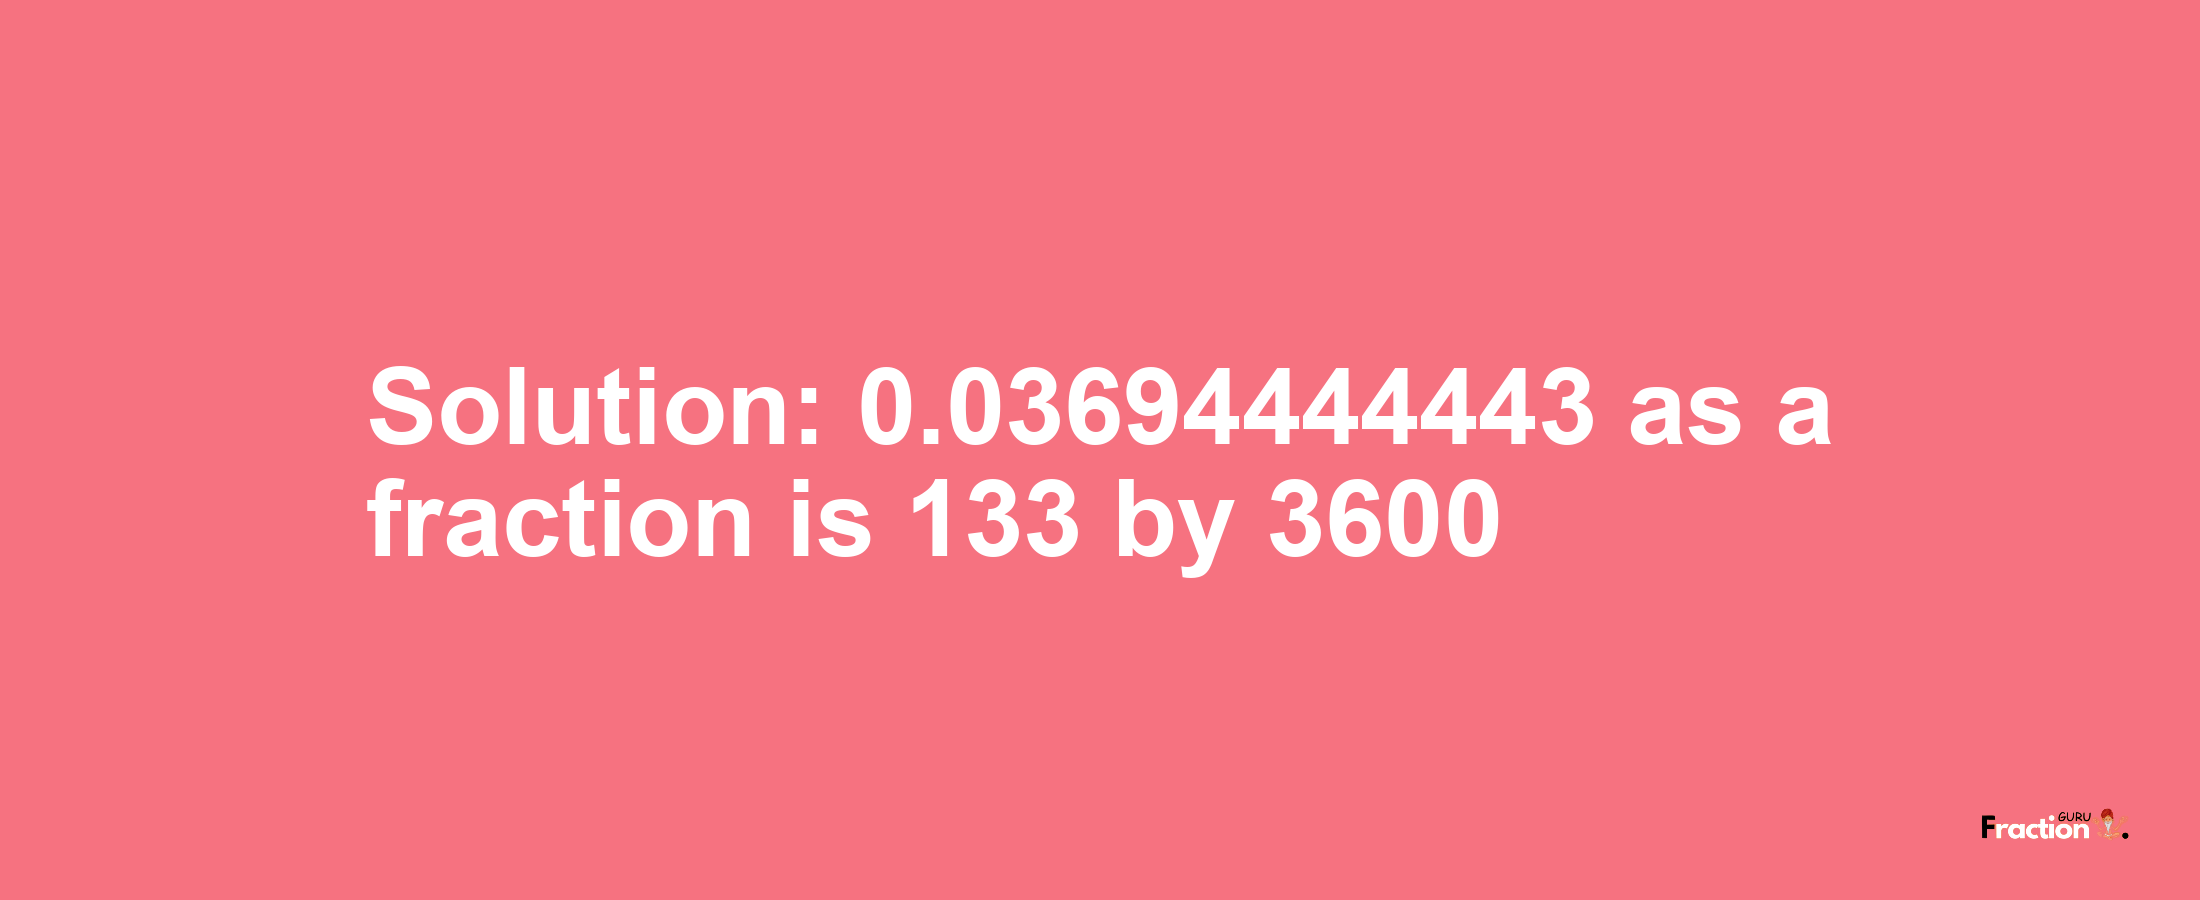 Solution:0.03694444443 as a fraction is 133/3600